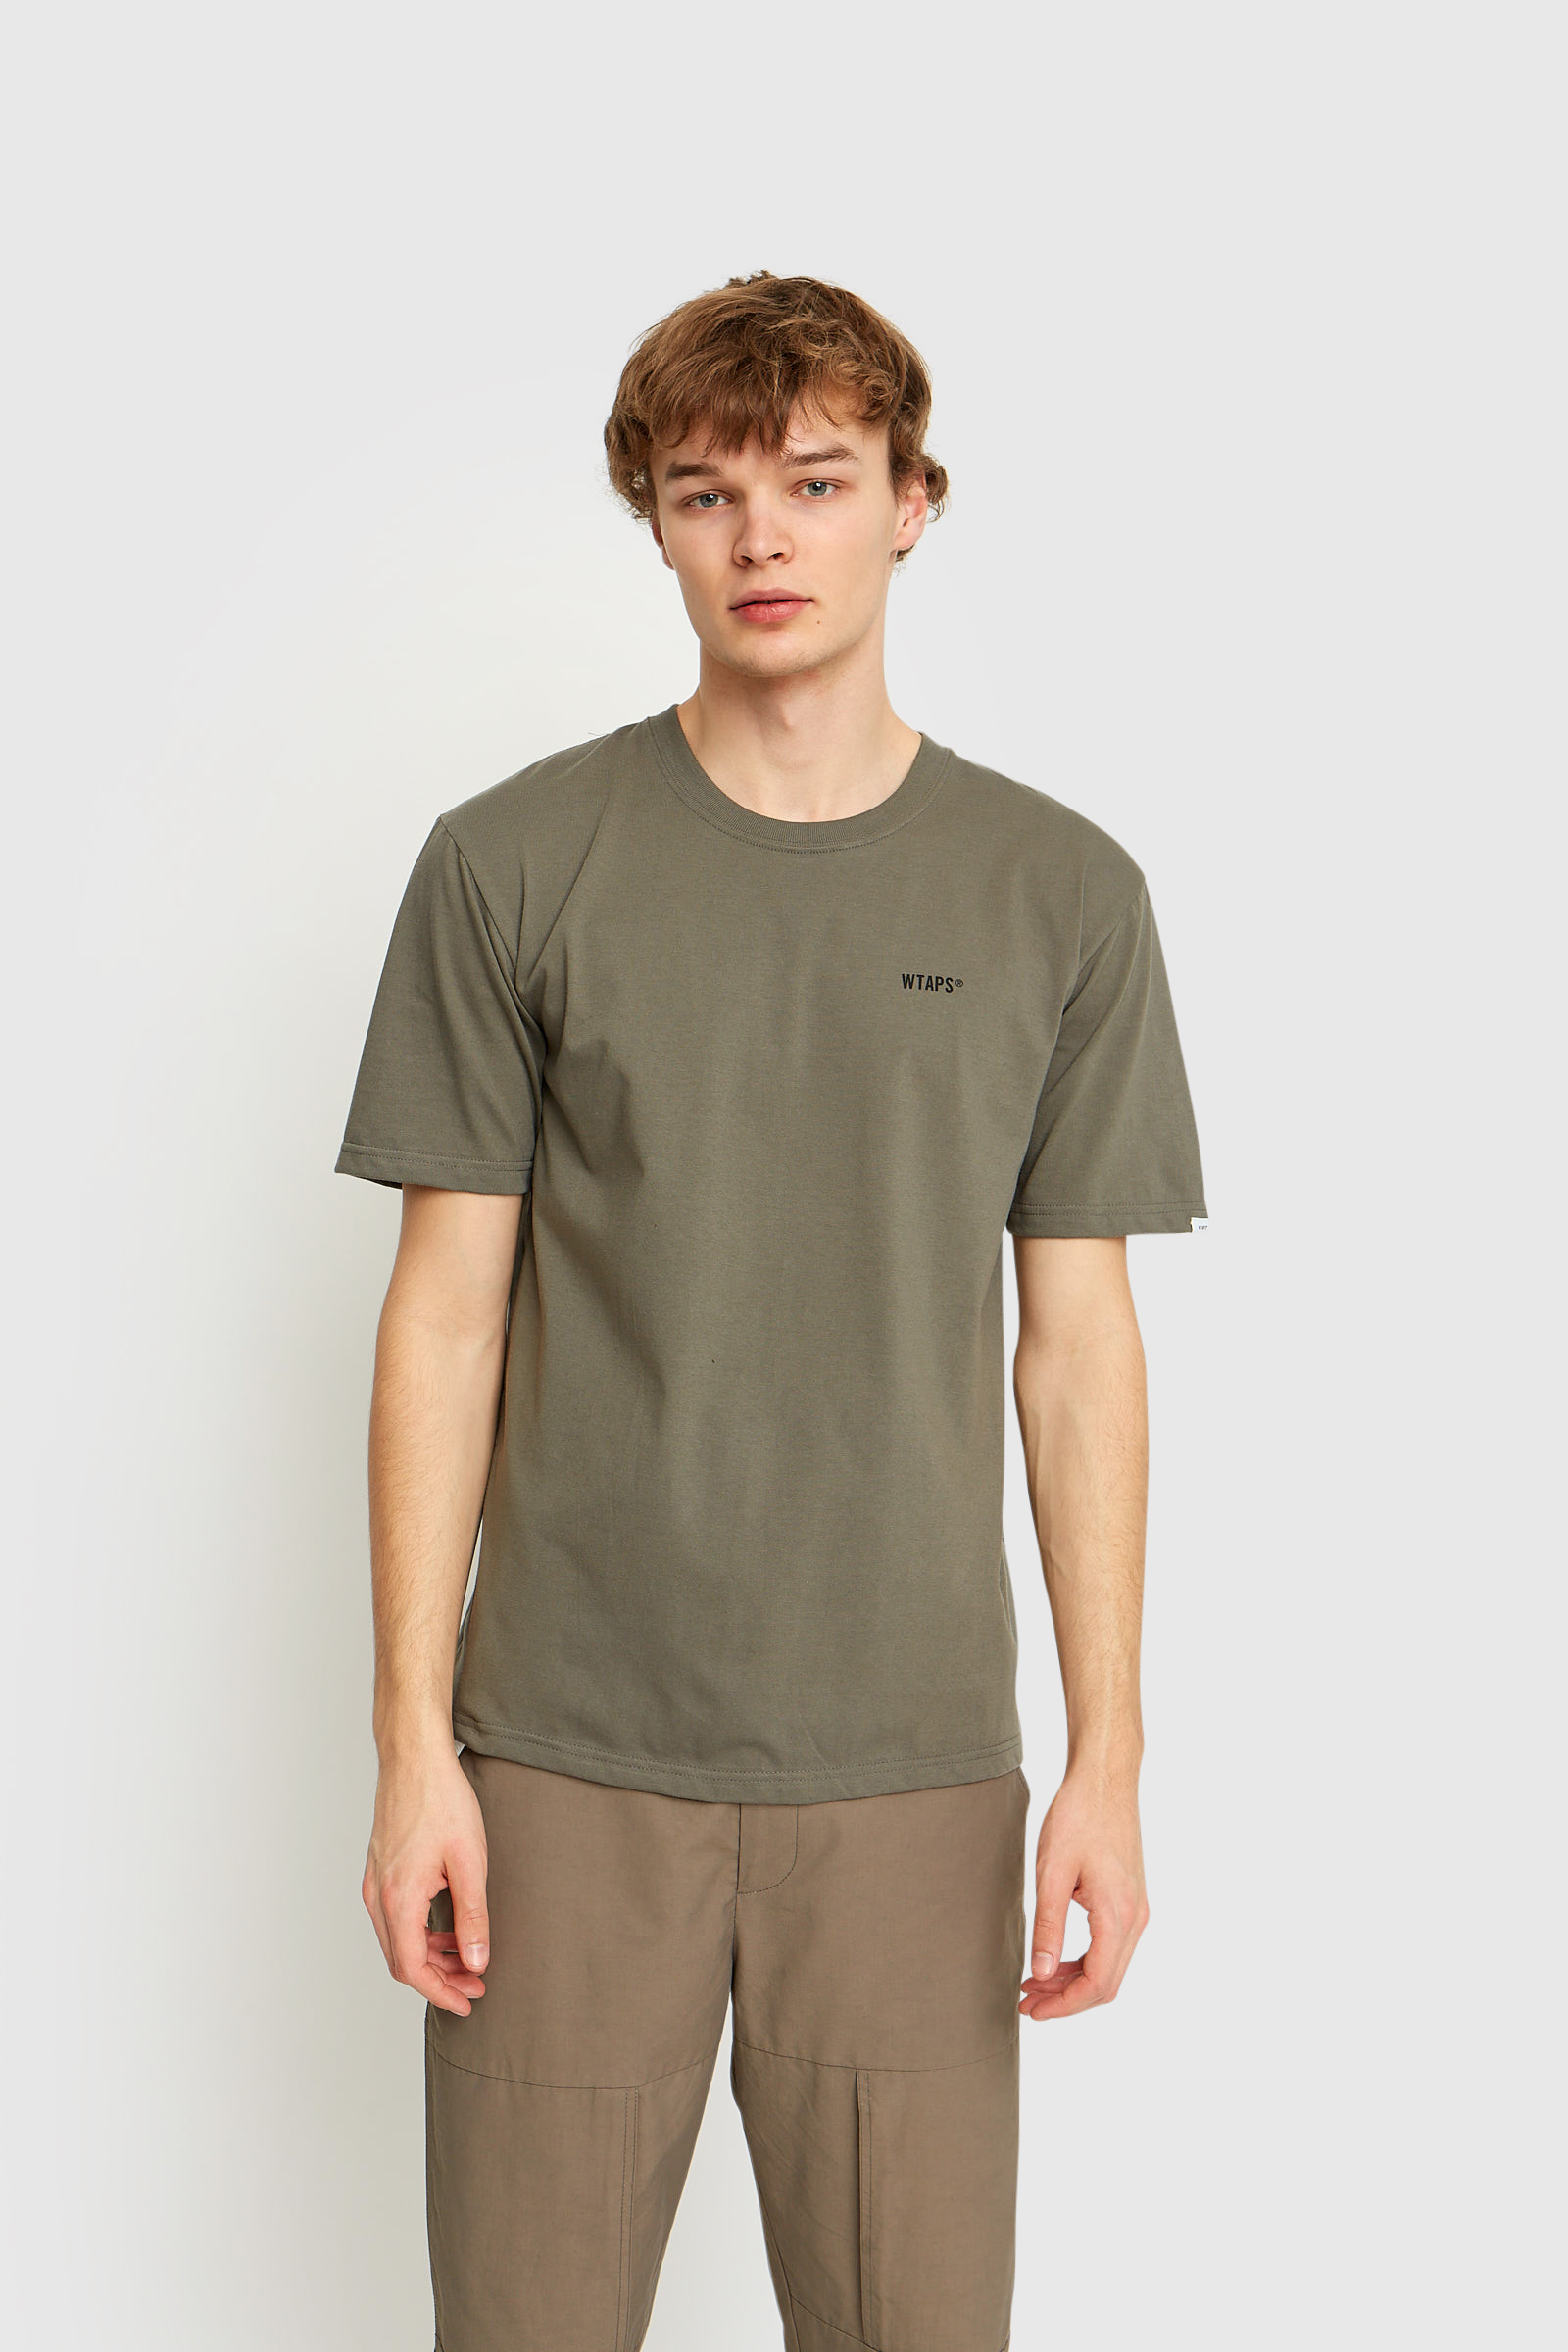 WTAPS 40pct Uparmored Olive drab | WoodWood.com